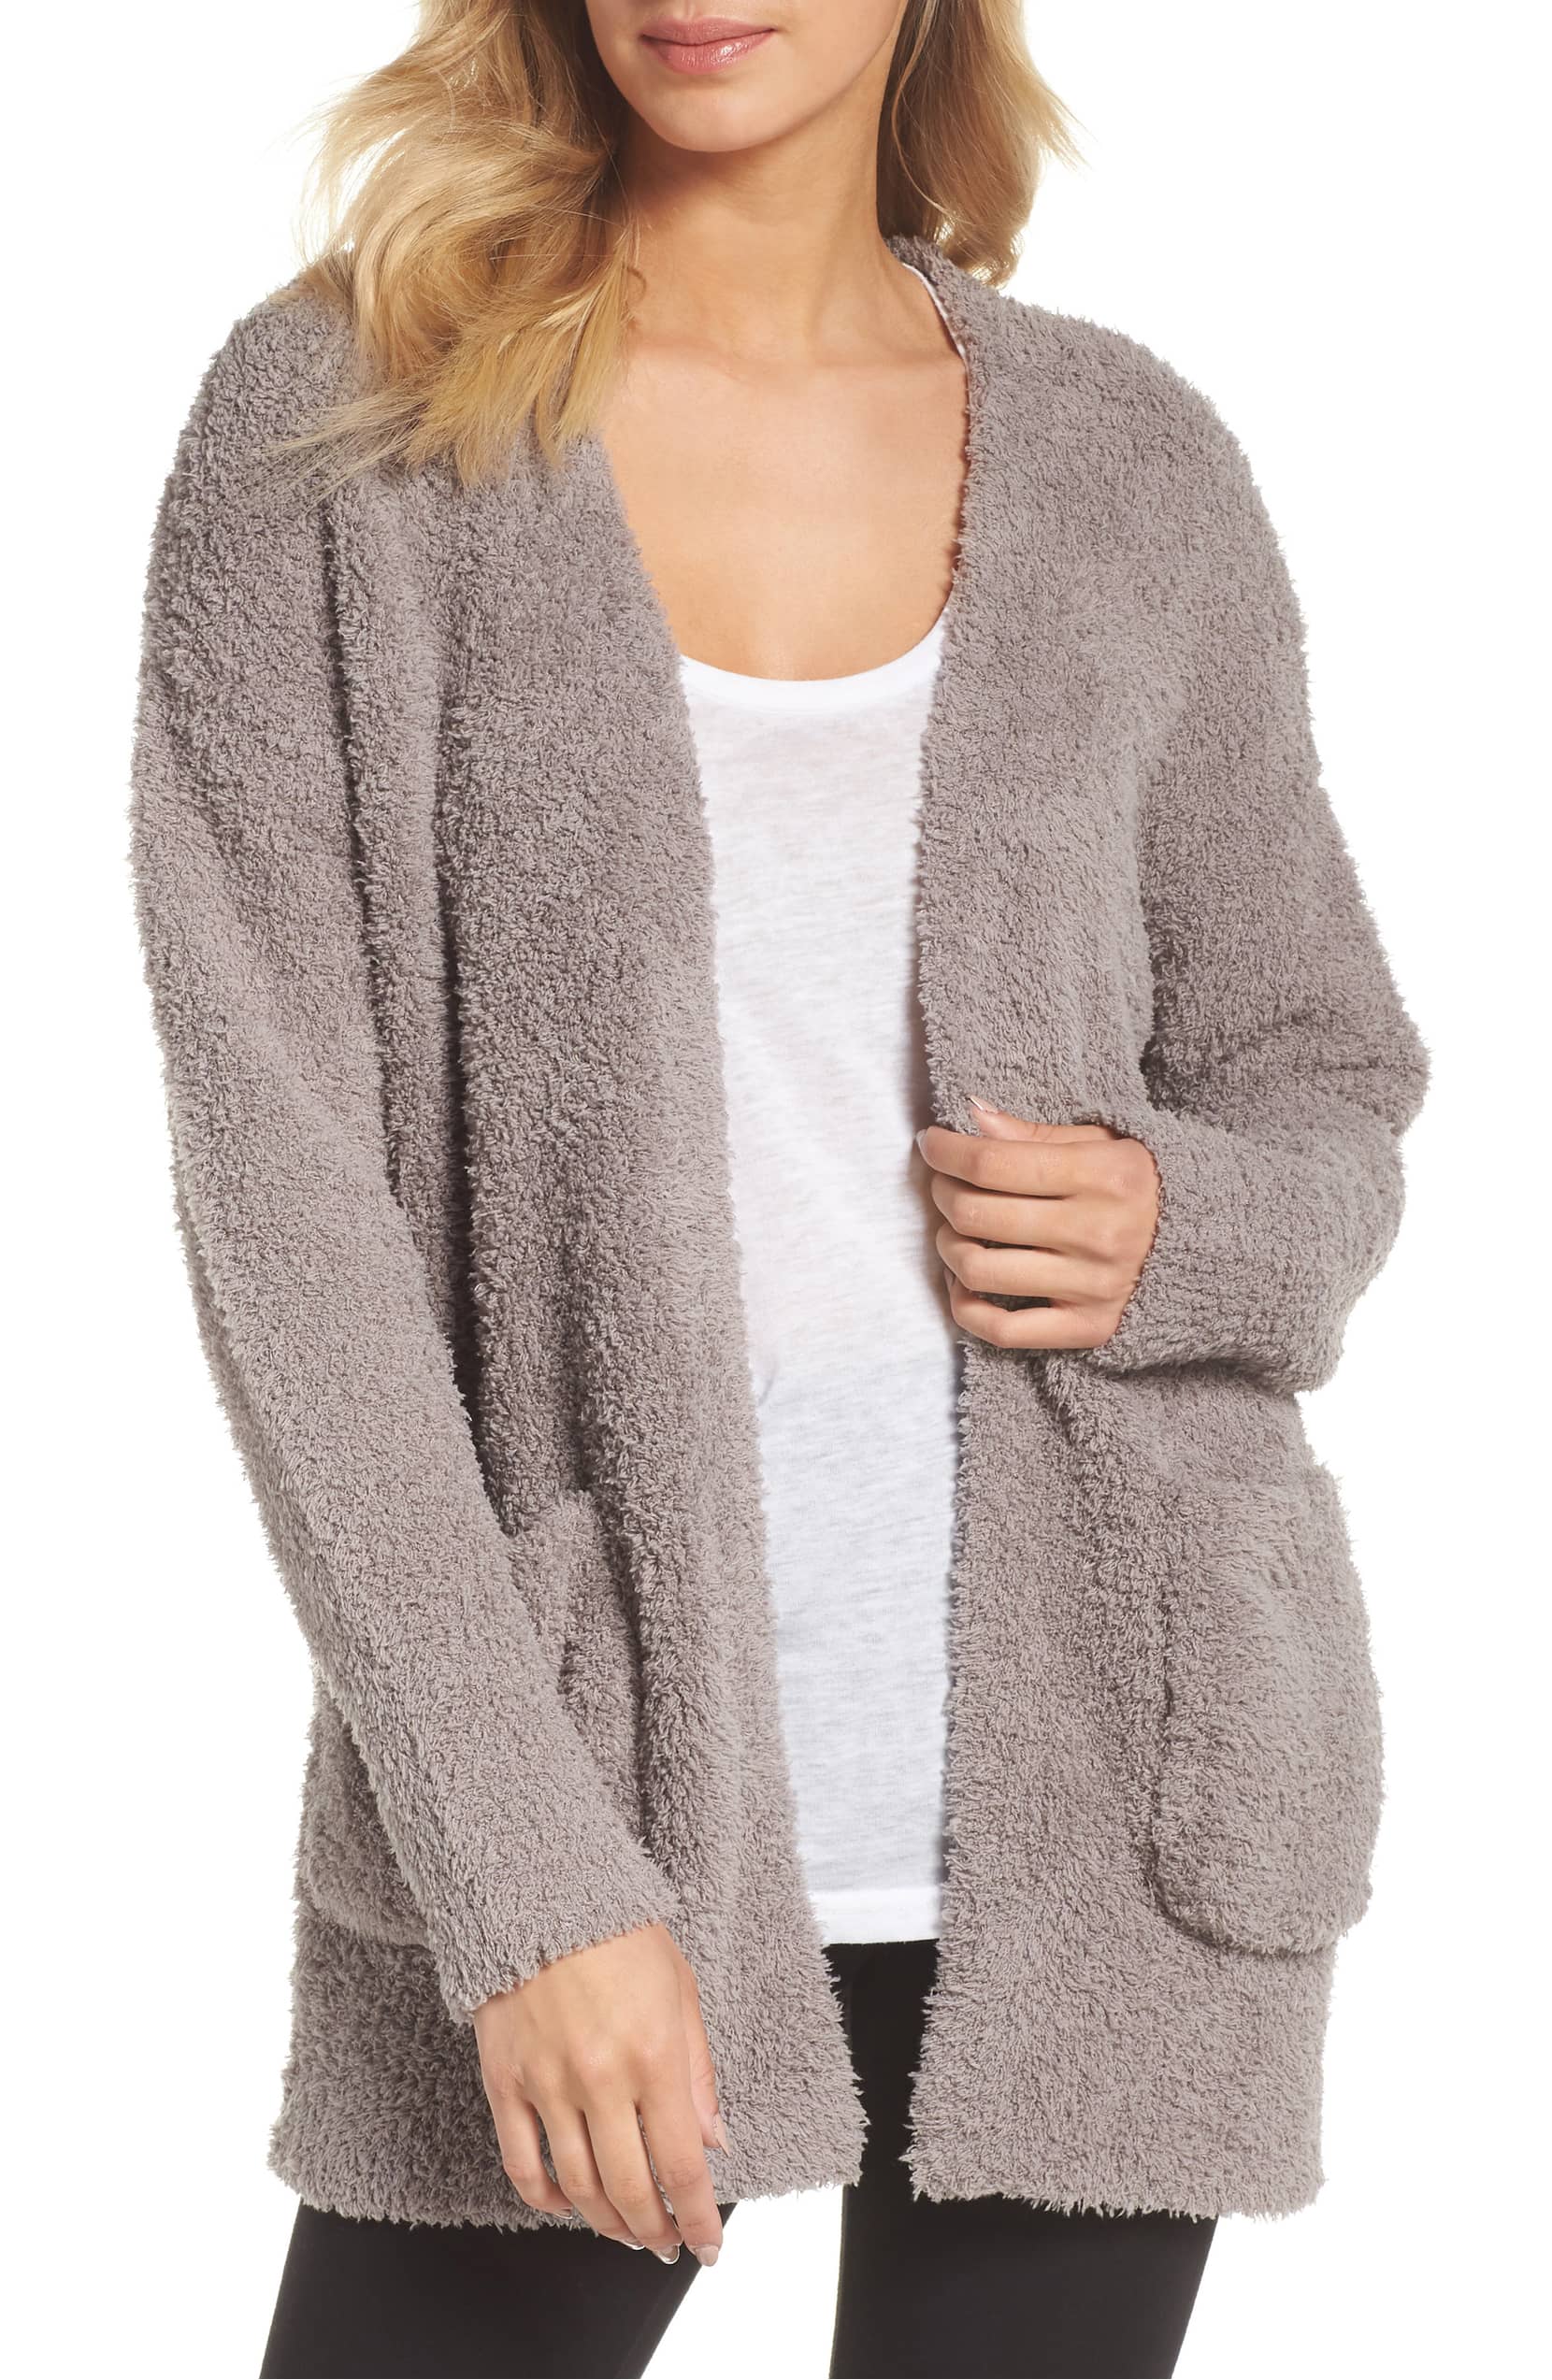 Stay Cozy in This Oversized Barefoot Dreams Cardigan